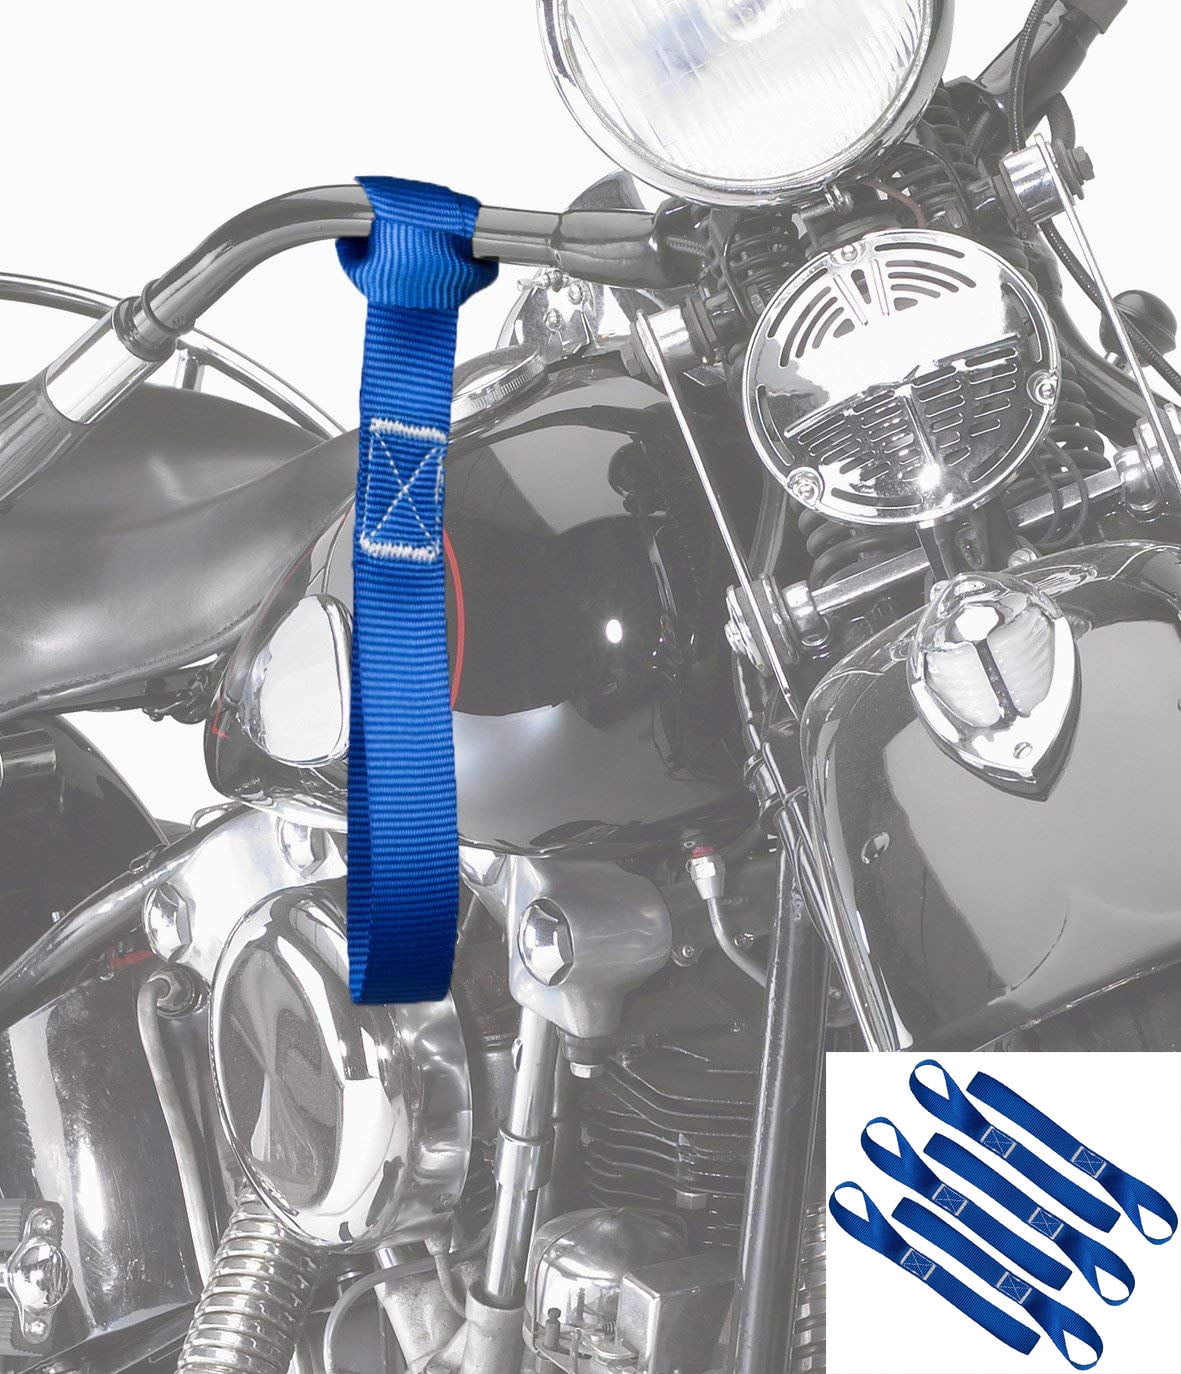 Soft Loop Tie Down 6PC Straps Securing Motorcycles Scooters Dirt Bike 1,500 Load 